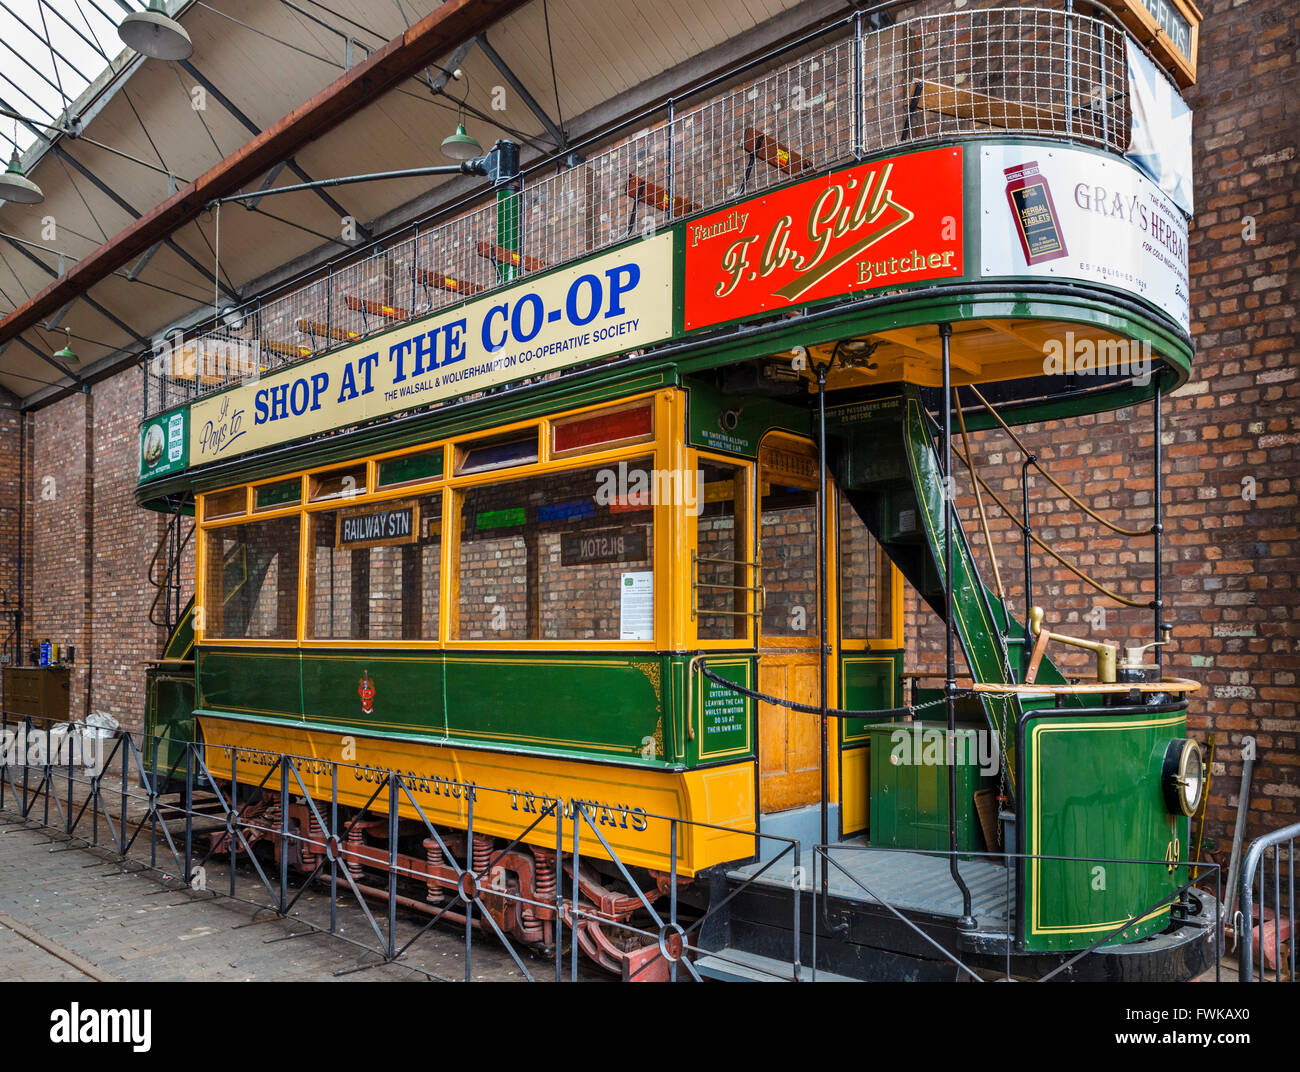 Wolverhampton Corporation Tramways open Topper Nr. 49, erbaut 1909, jetzt bei Black Country Living Museum, Dudley, Midlands, UK Stockfoto